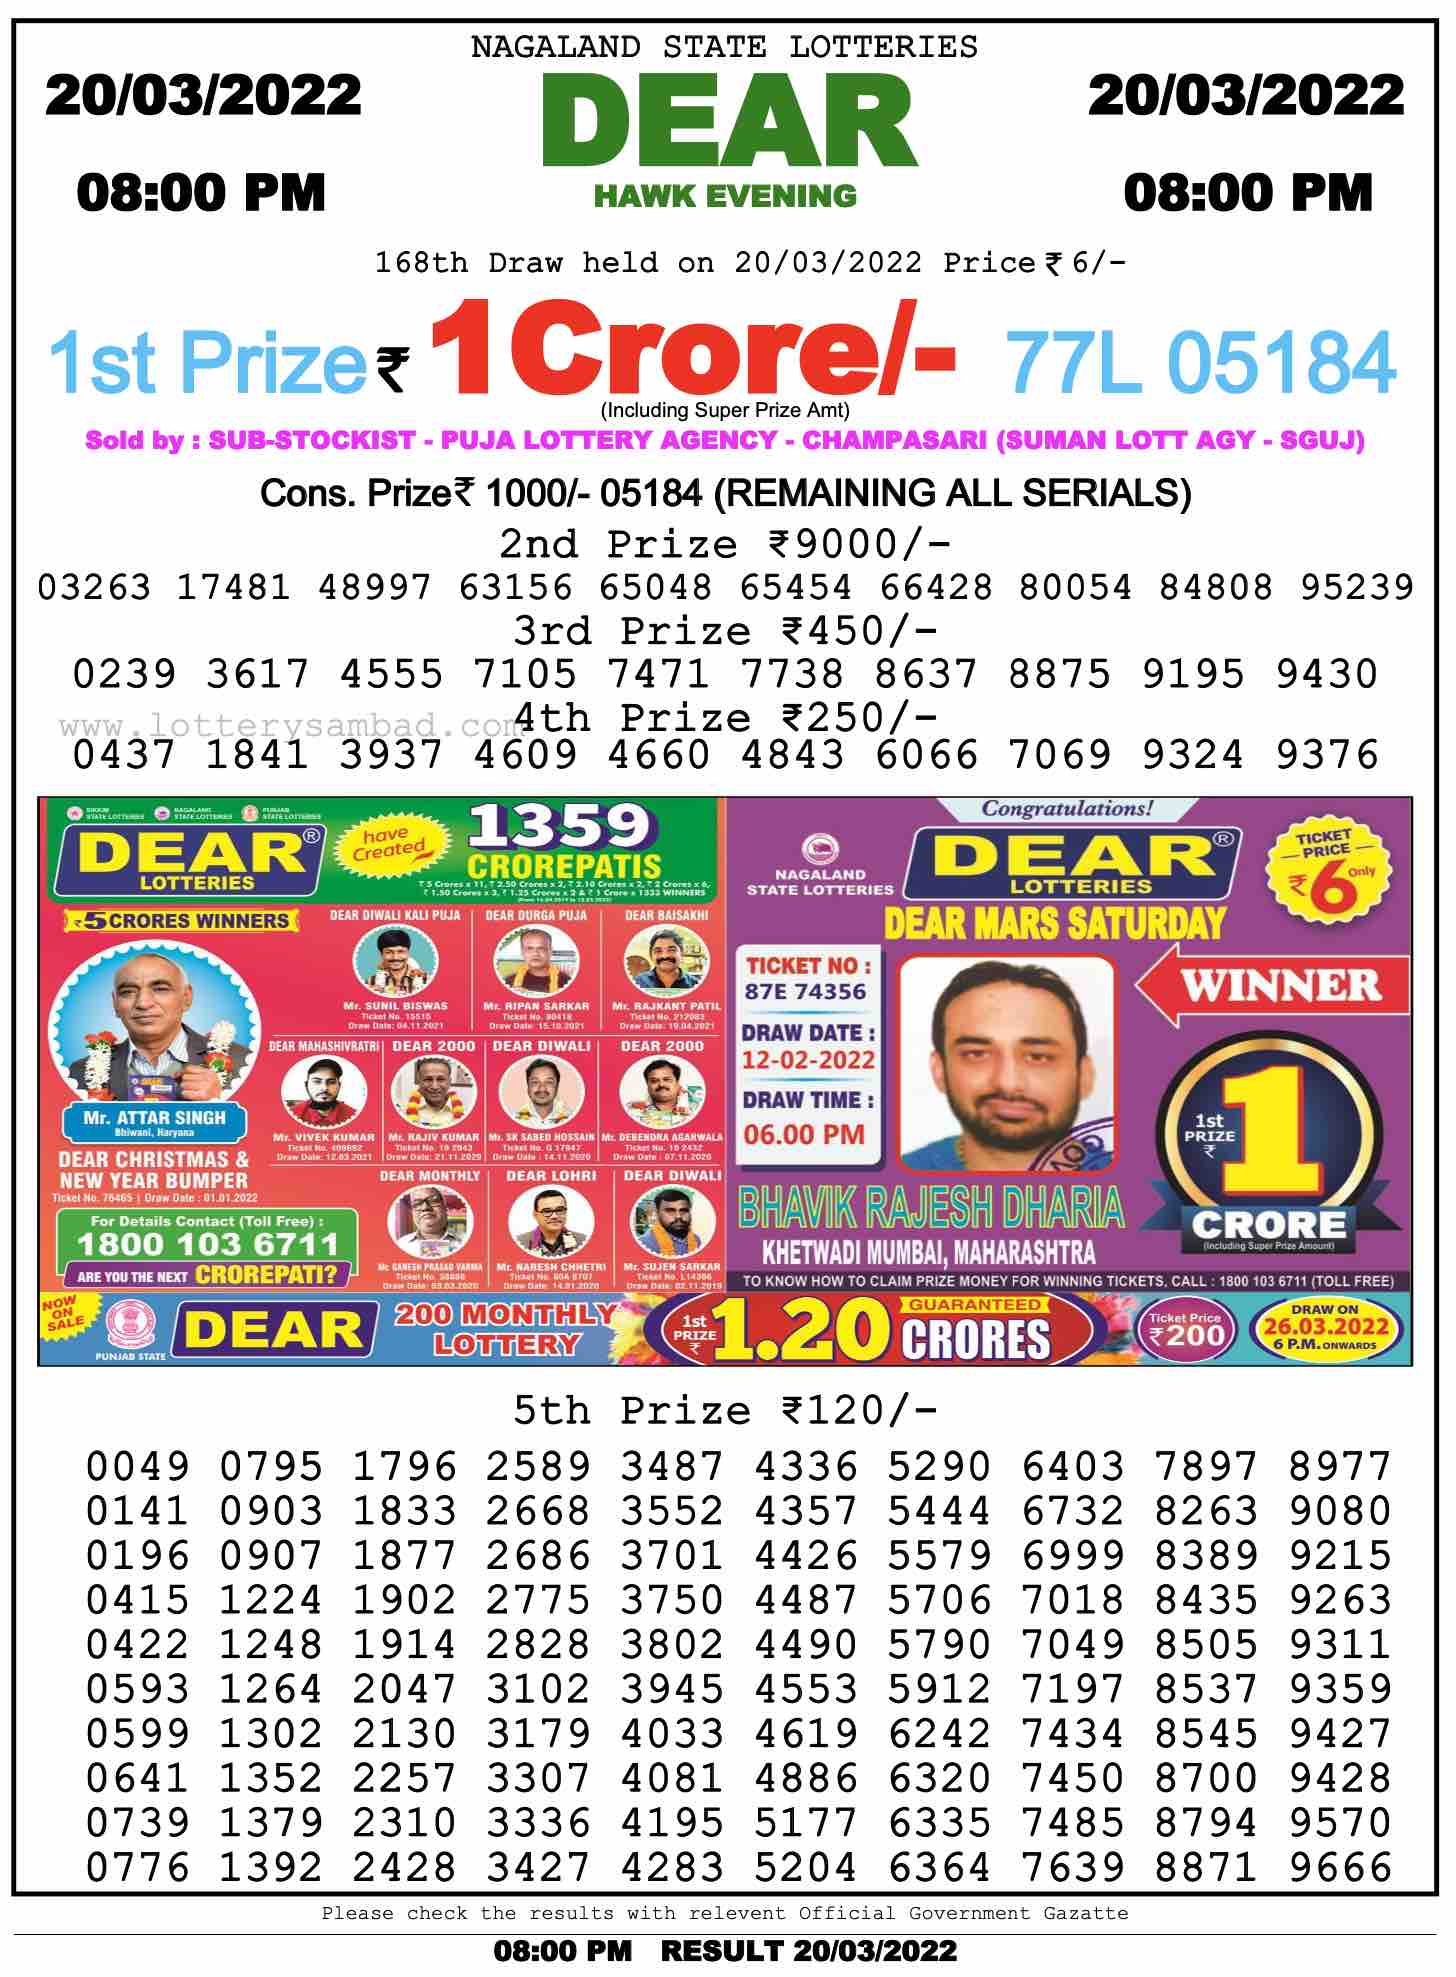 Dear Lottery Nagaland state Lottery Results 08.00 pm 20.03.2022